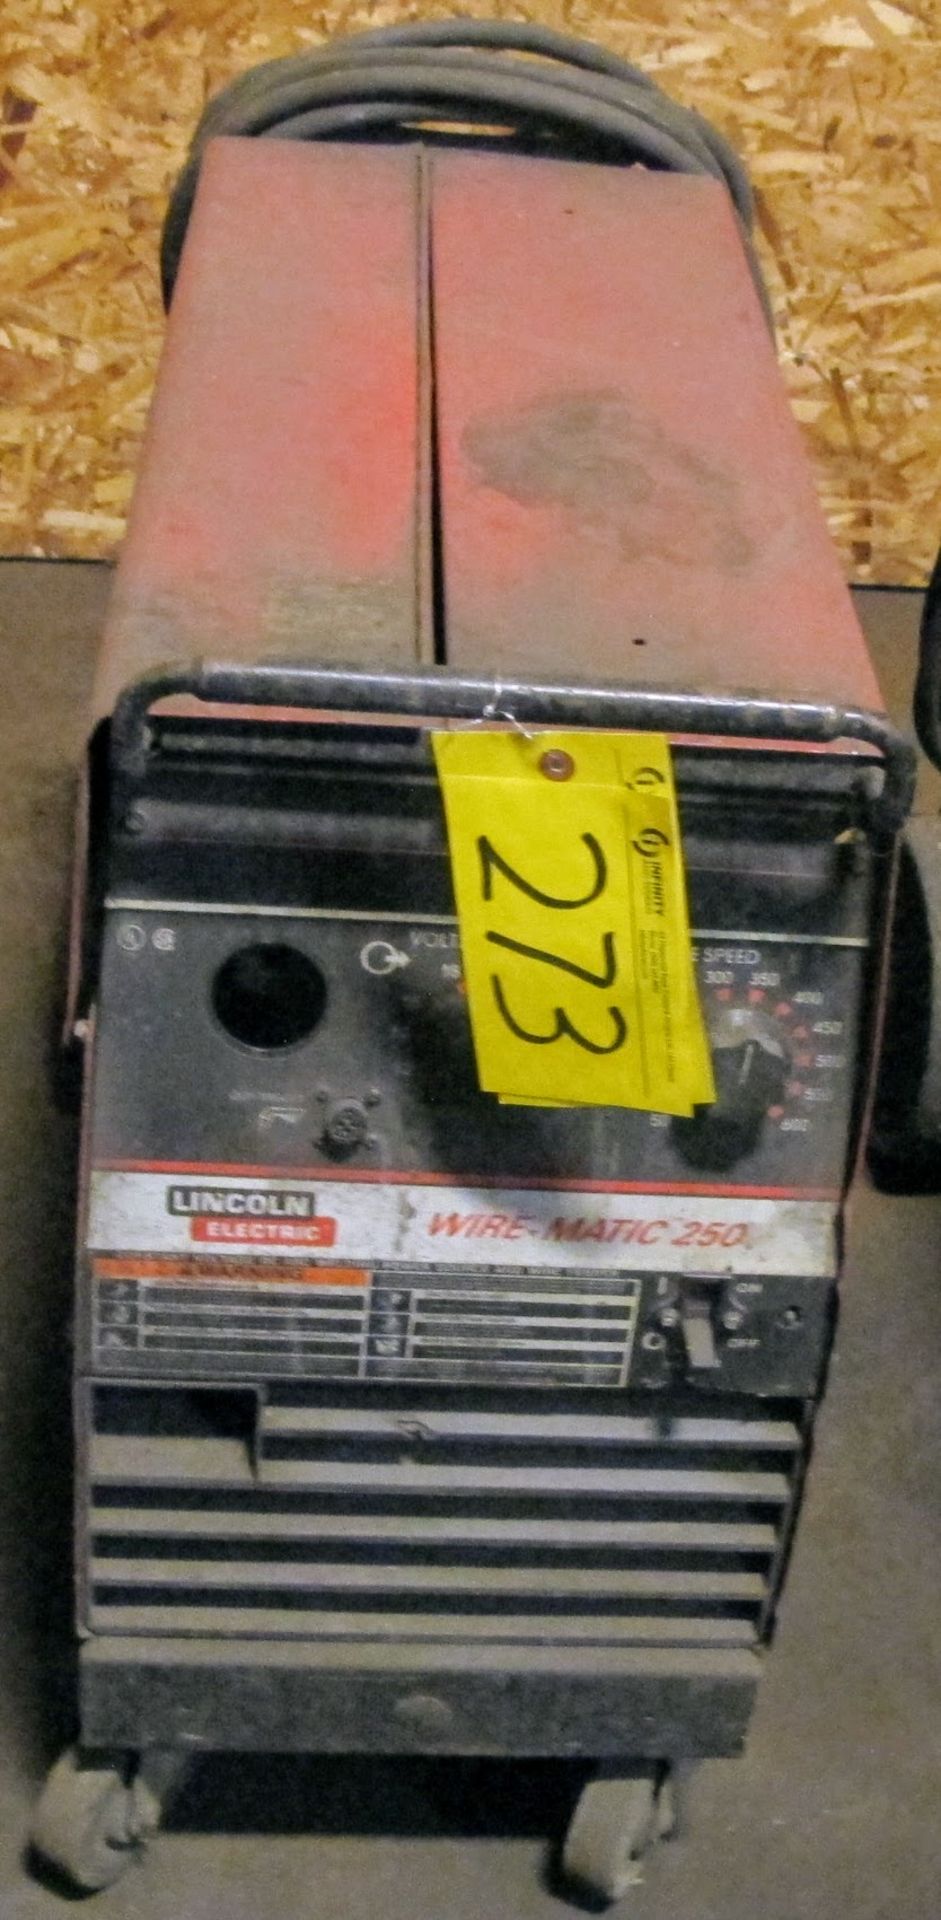 LINCOLN ELECTRIC WIREMATIC 250 WELDER